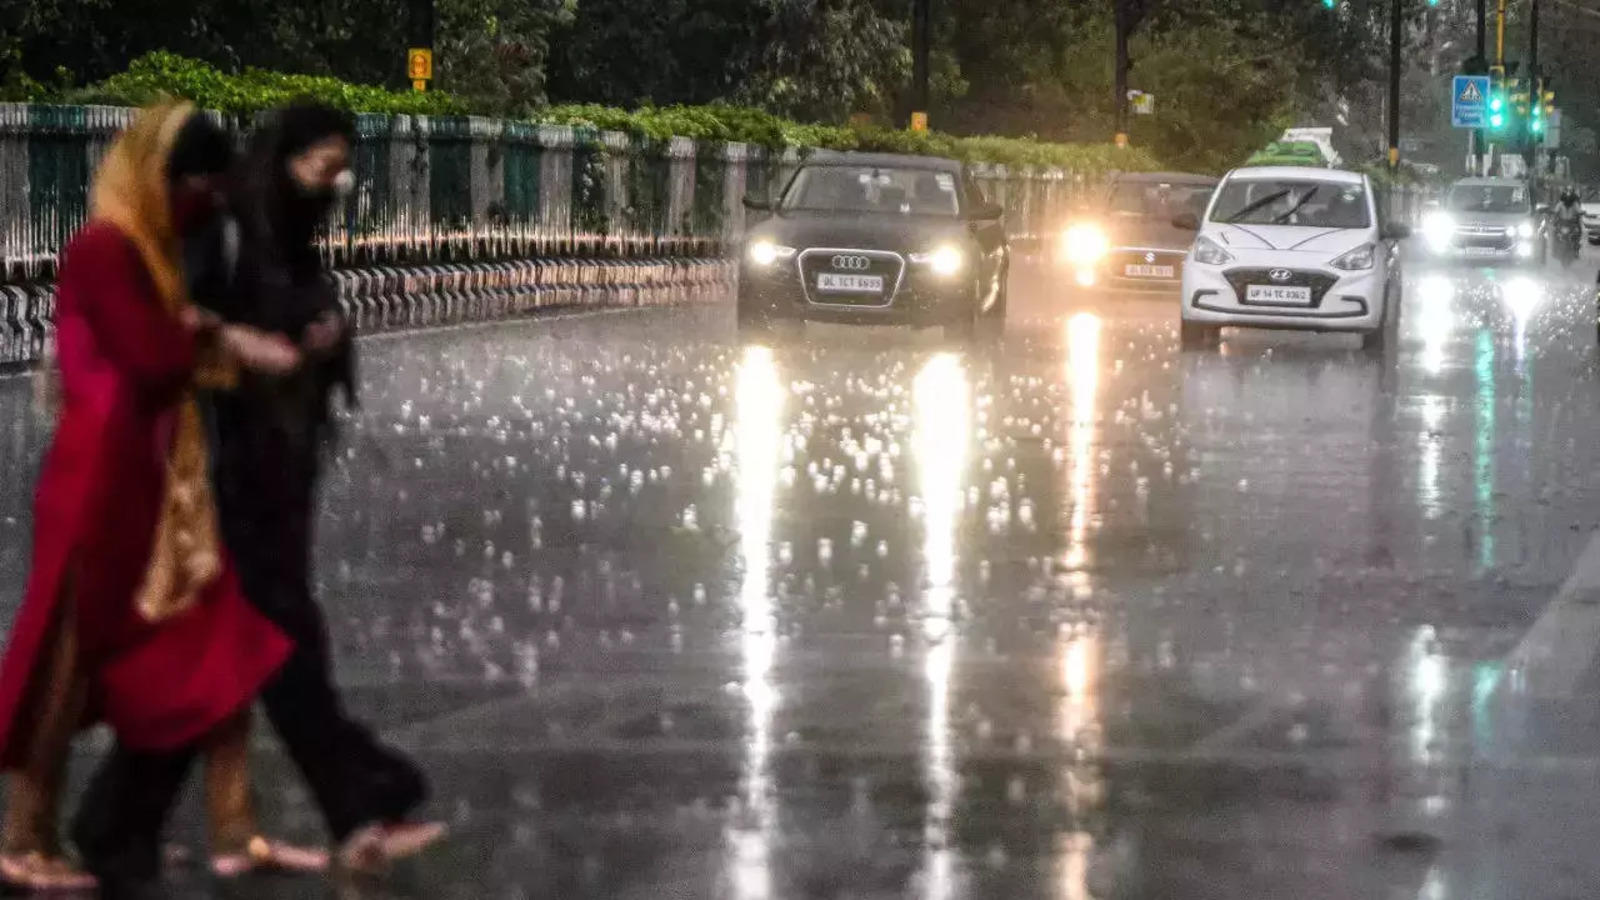 Delhi begins an otherwise scorching May with pleasant 19 degrees Celsius;  IMD predicts thunderstorms with rain - The Economic Times